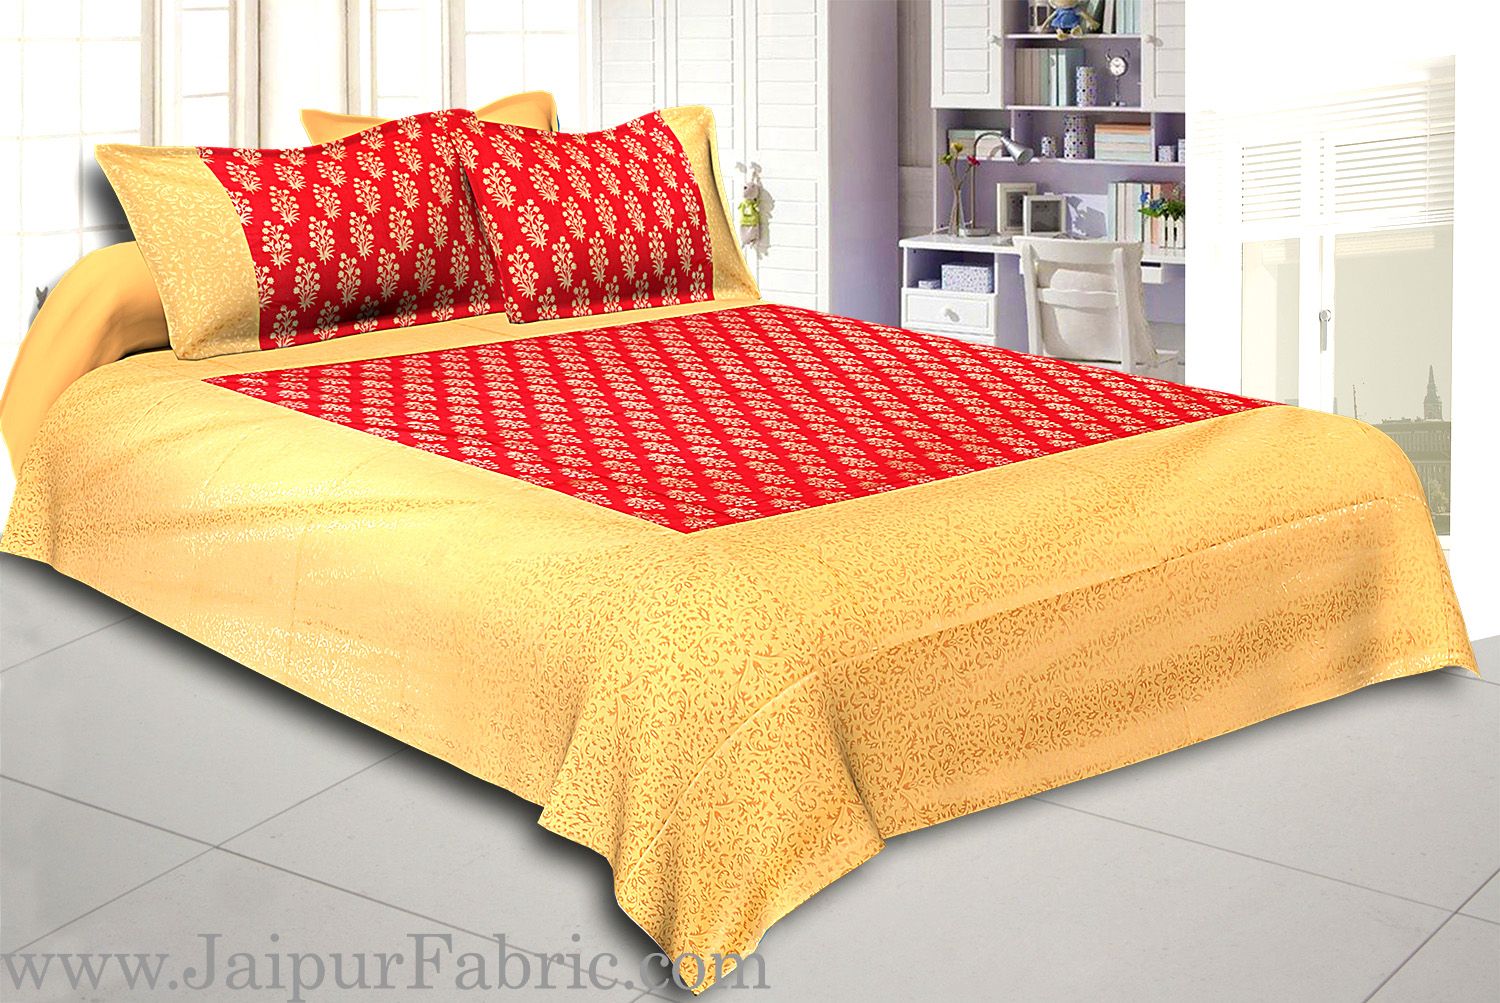 Cream Broad Border With Shining Gold Print Orange Base Gold Flower Bunch Pattern Super Fine Cotton  Double Bed Sheet